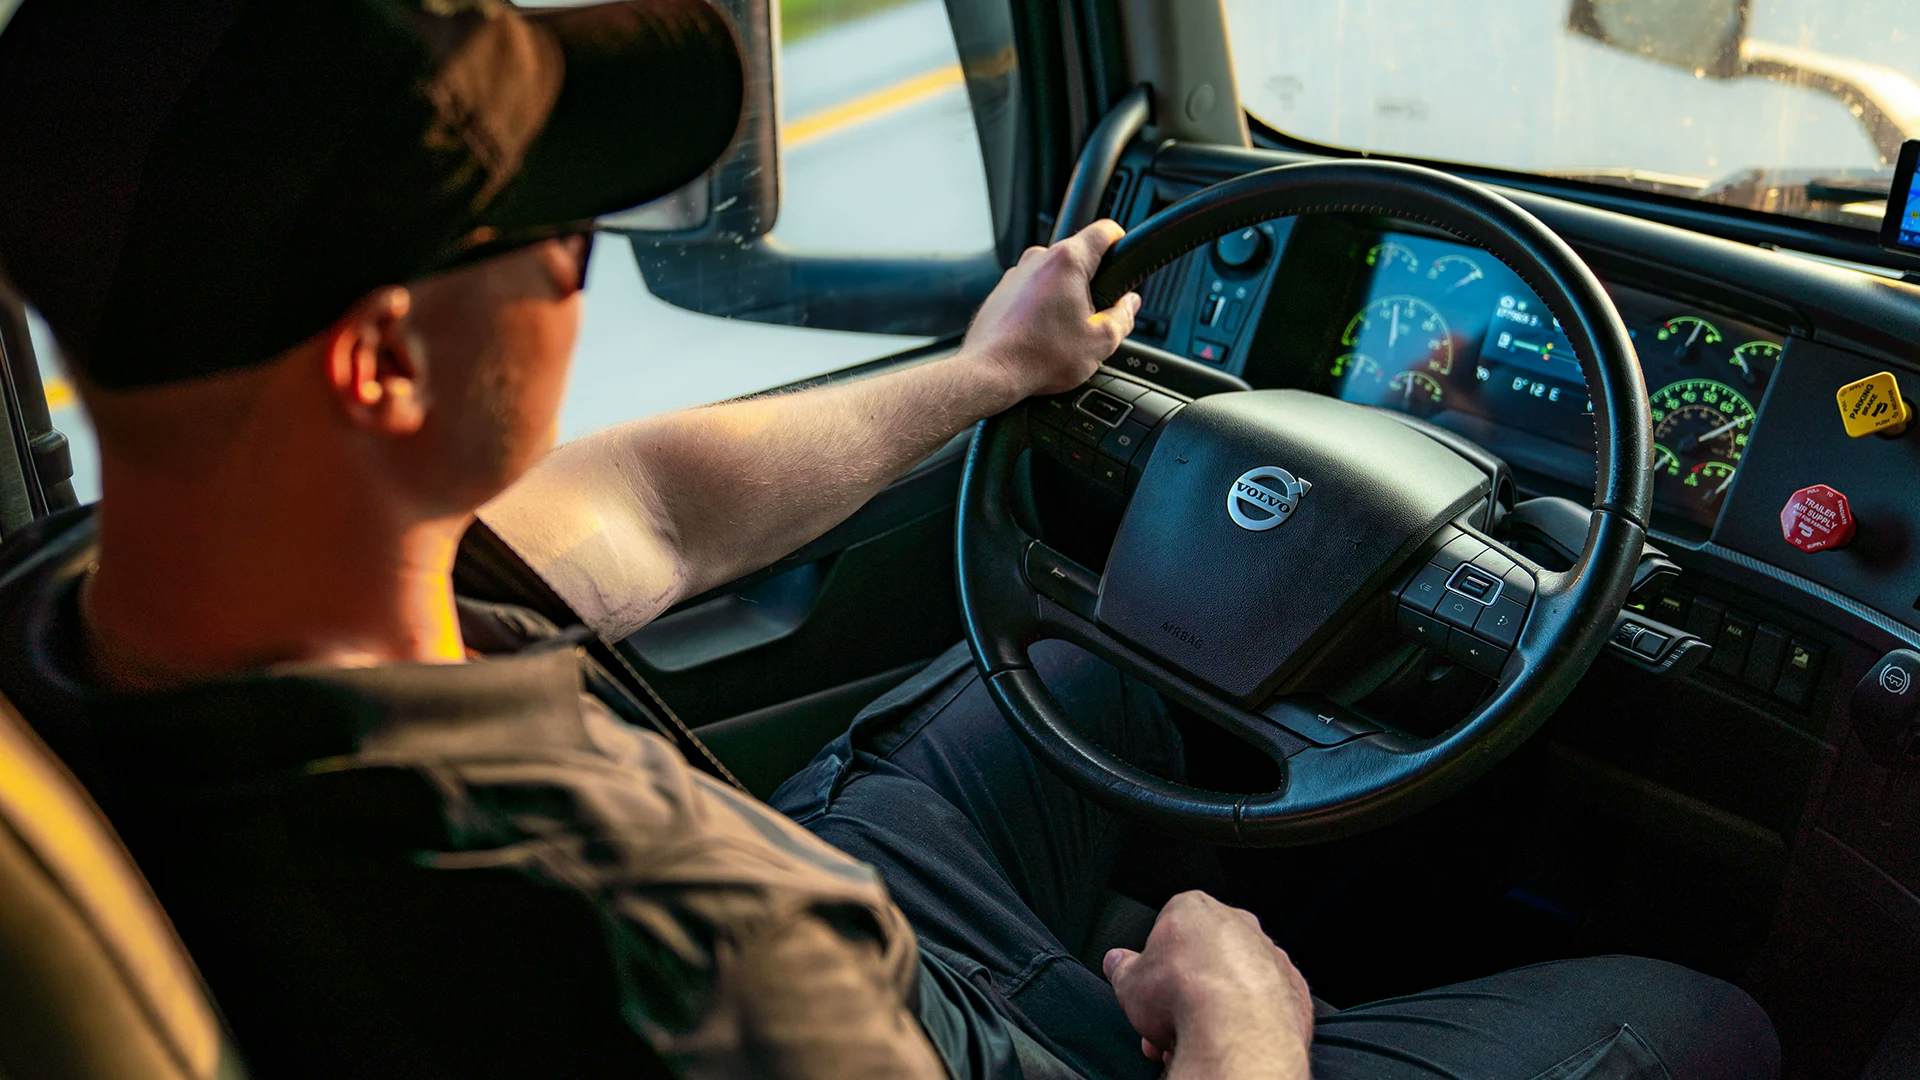 Interior of a Volvo truck with a clear view of the steering wheel and dashboard, highlighting the driver's seat and environment.